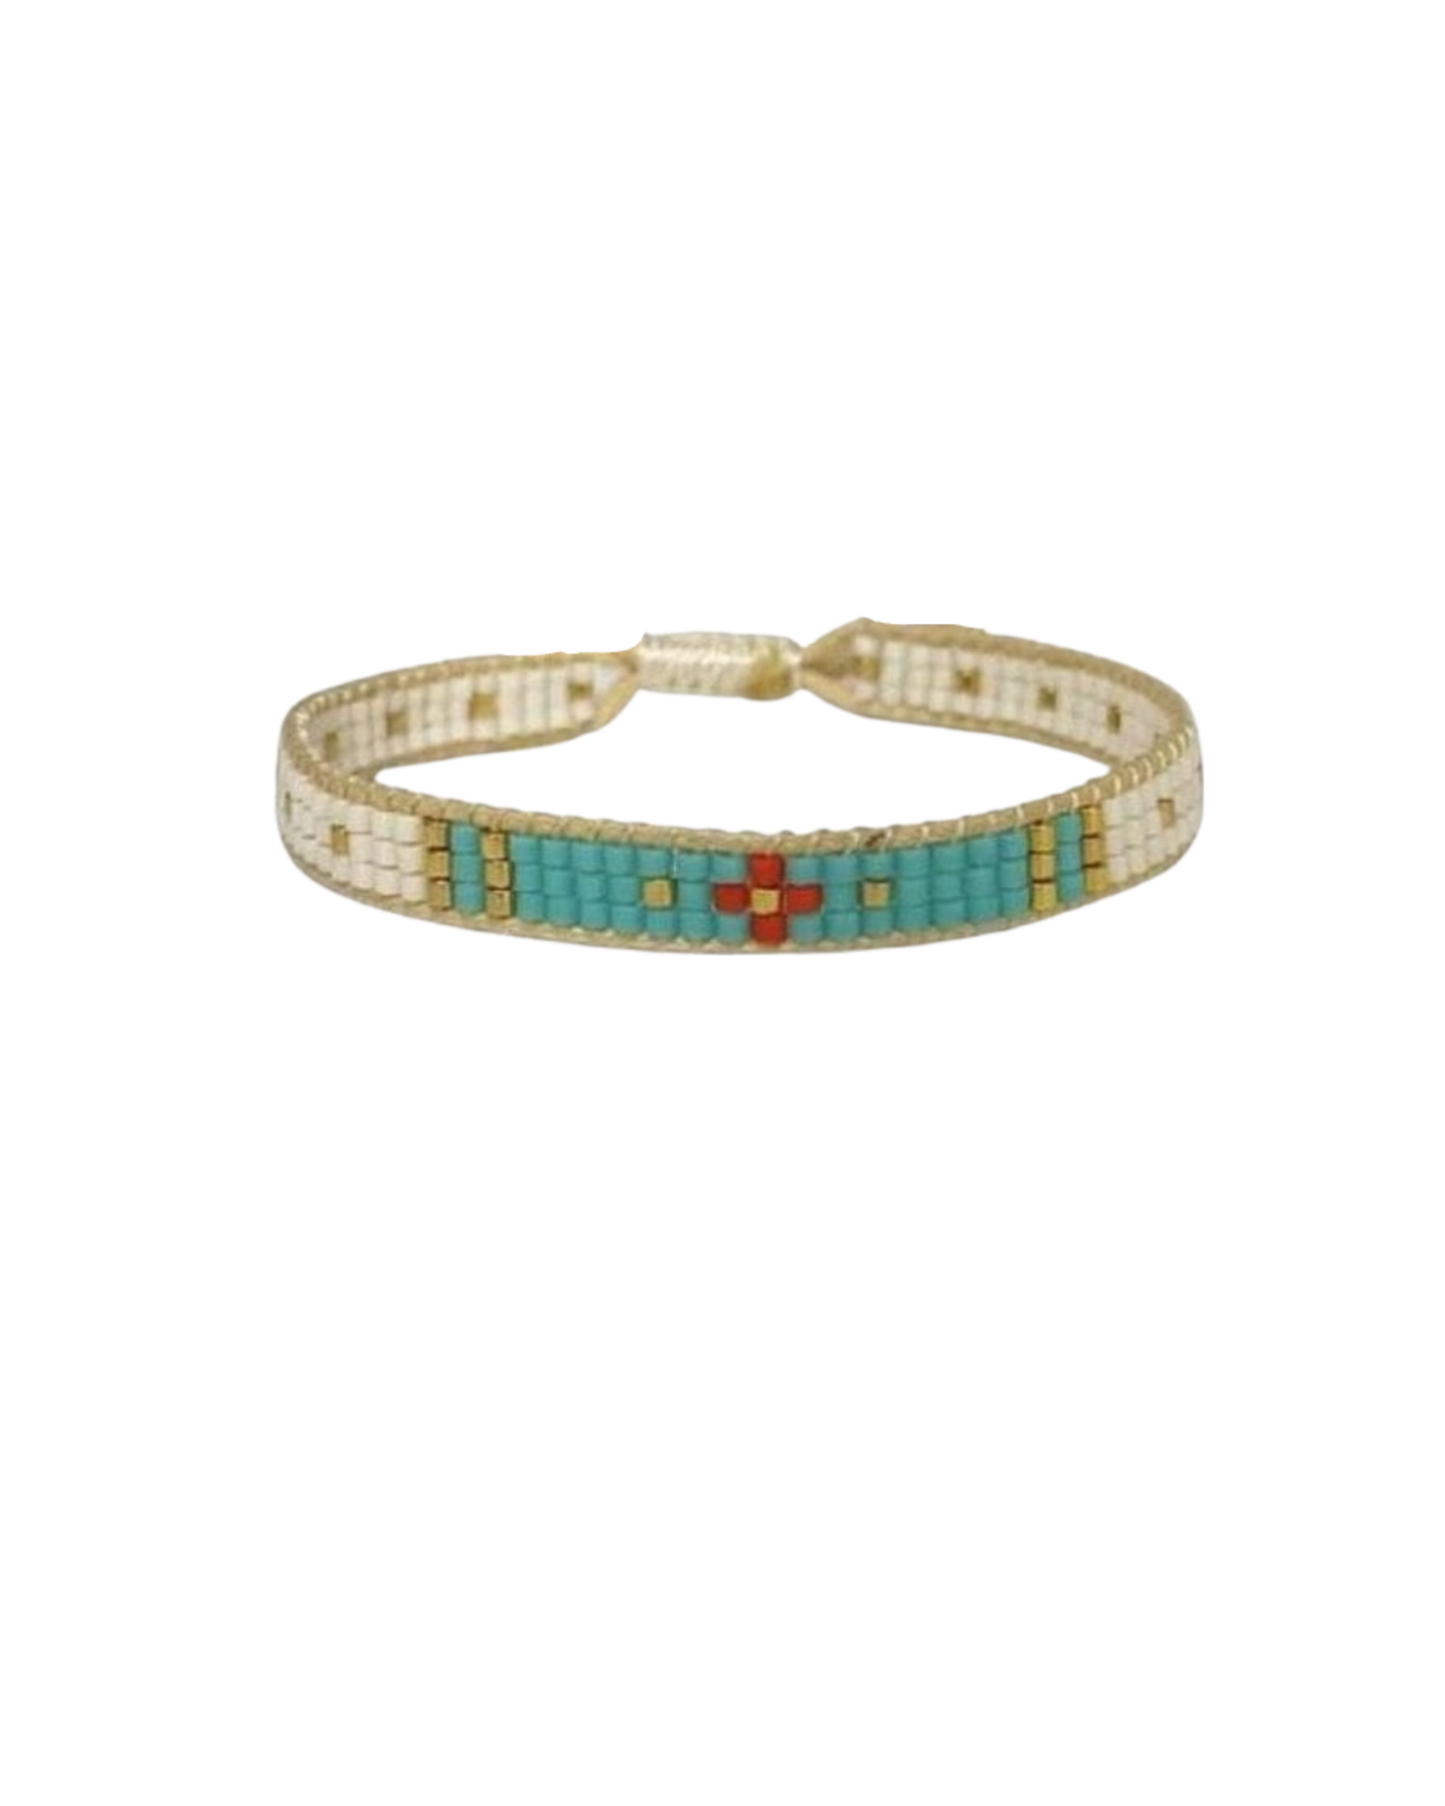 Ivory and turquoise mexican bracelets